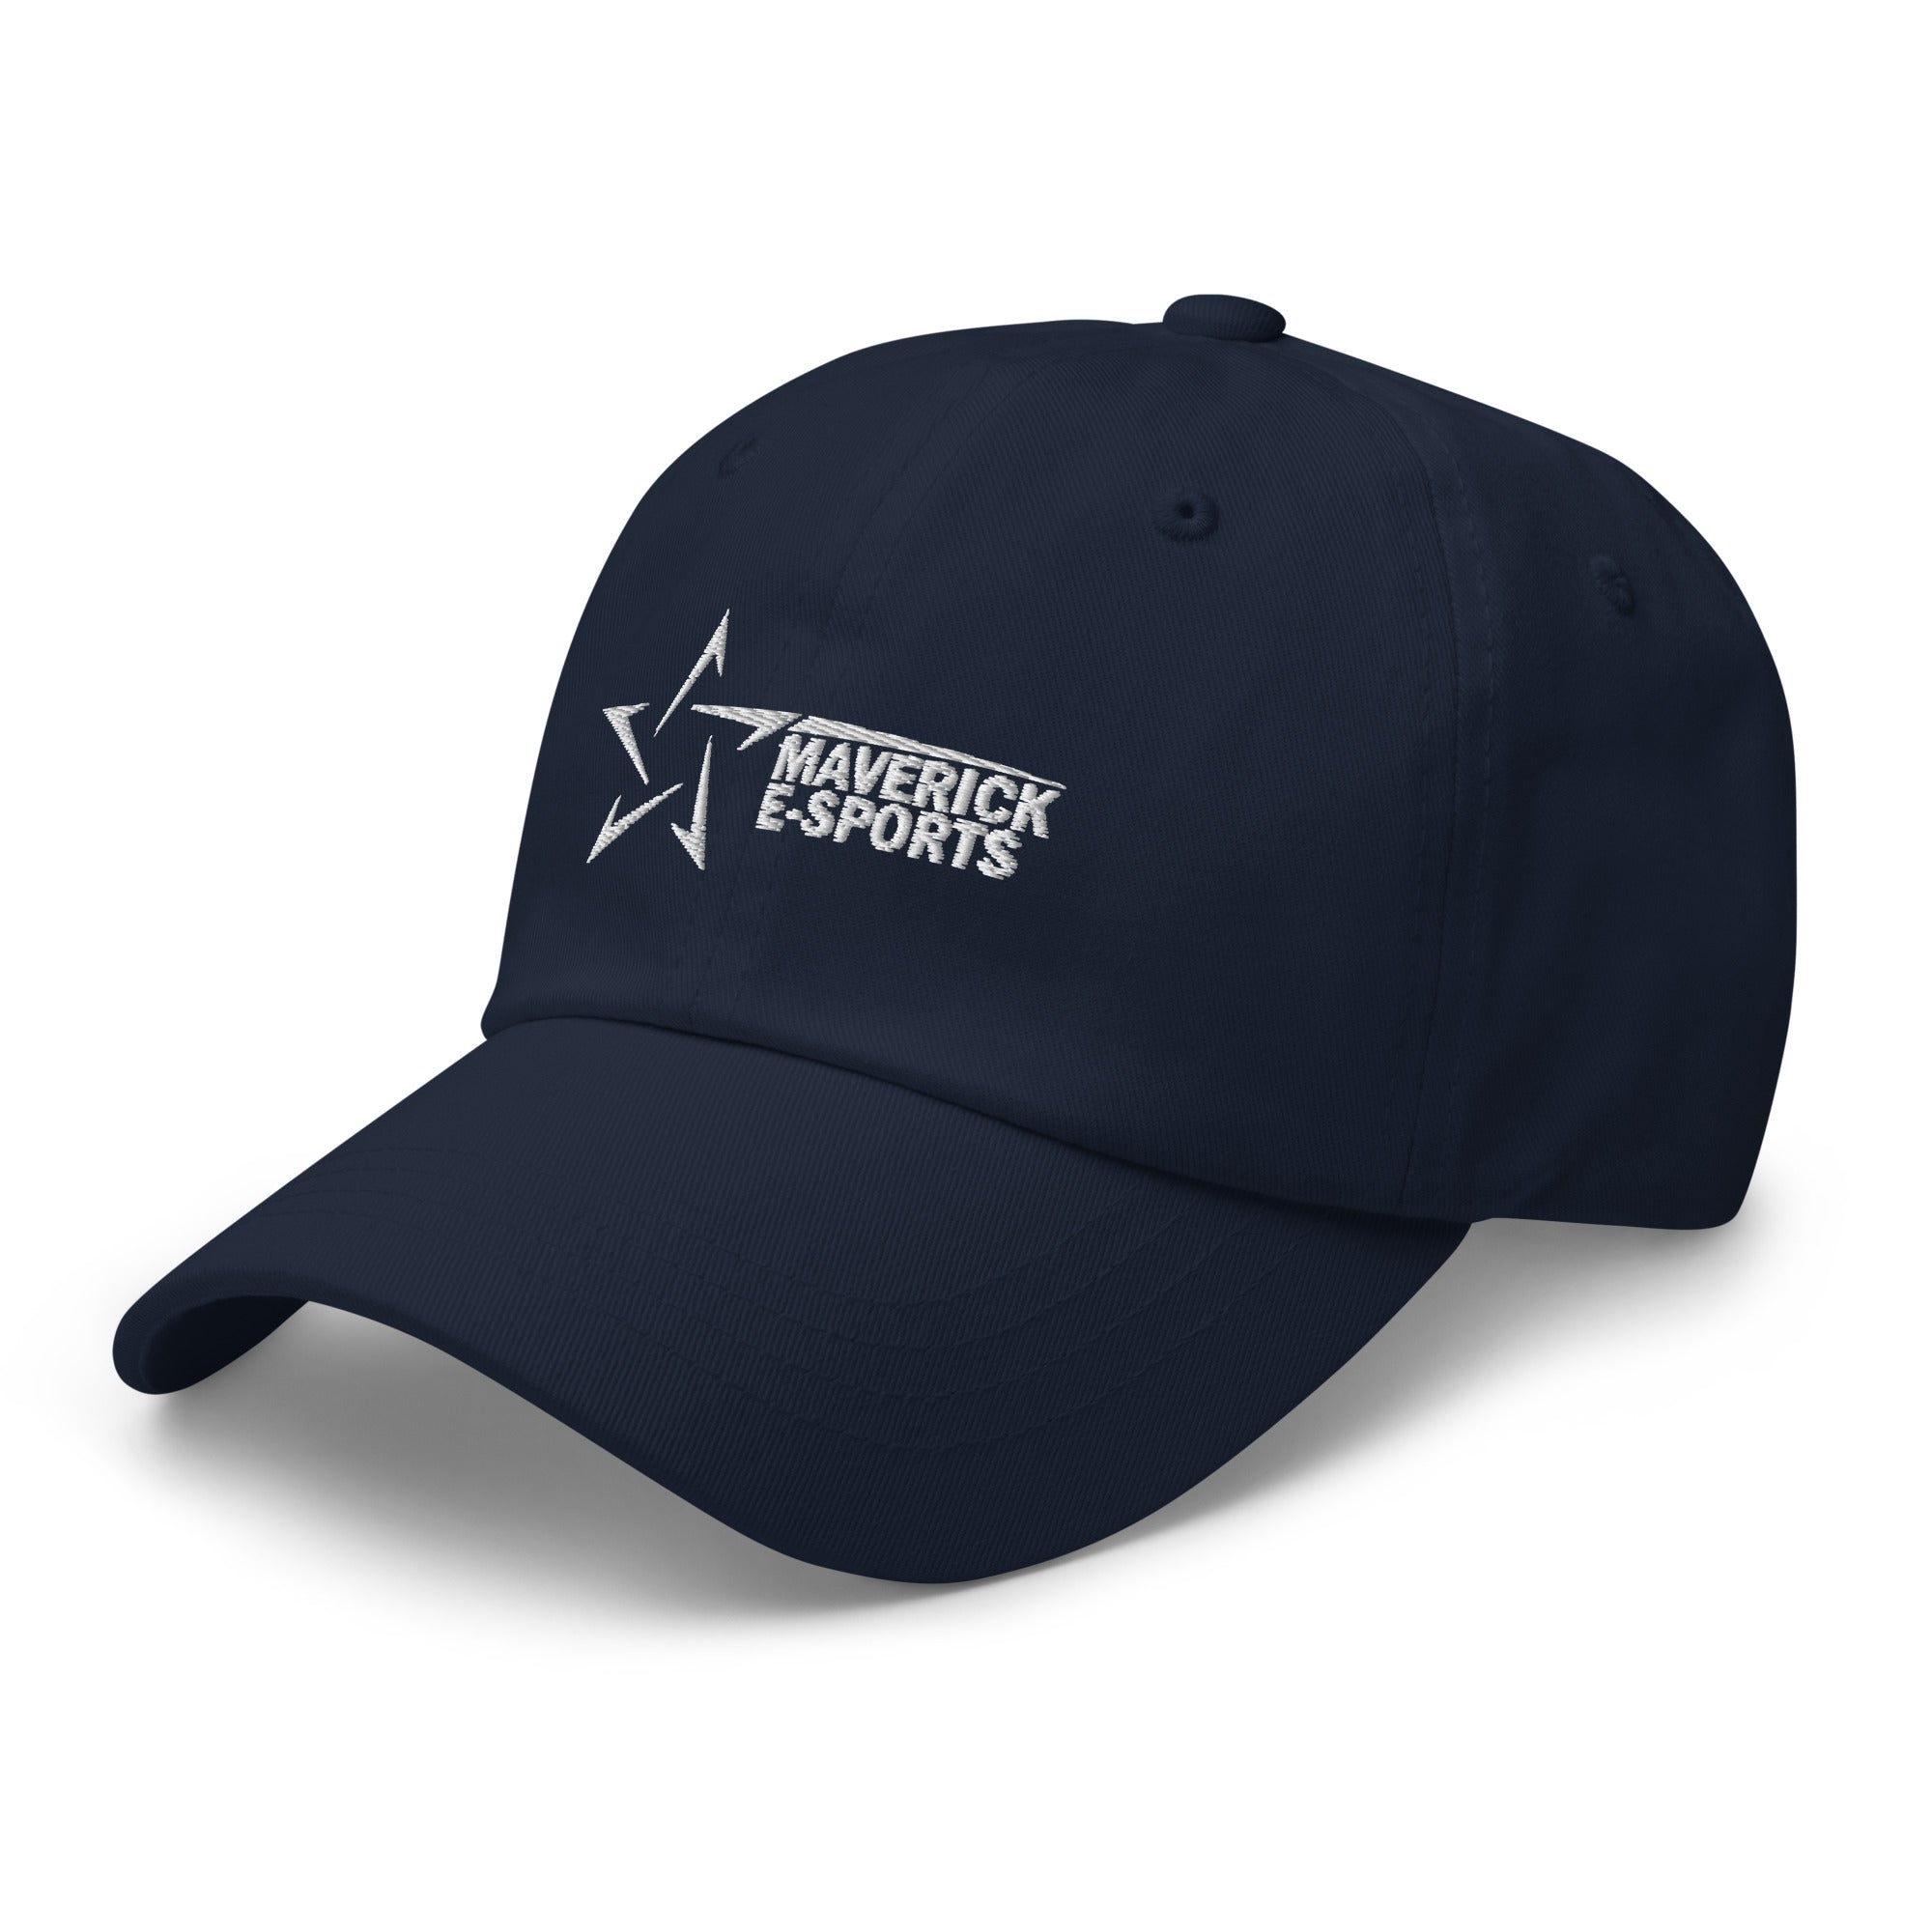 Southside High School | On Demand | Embroidered Dad Hat